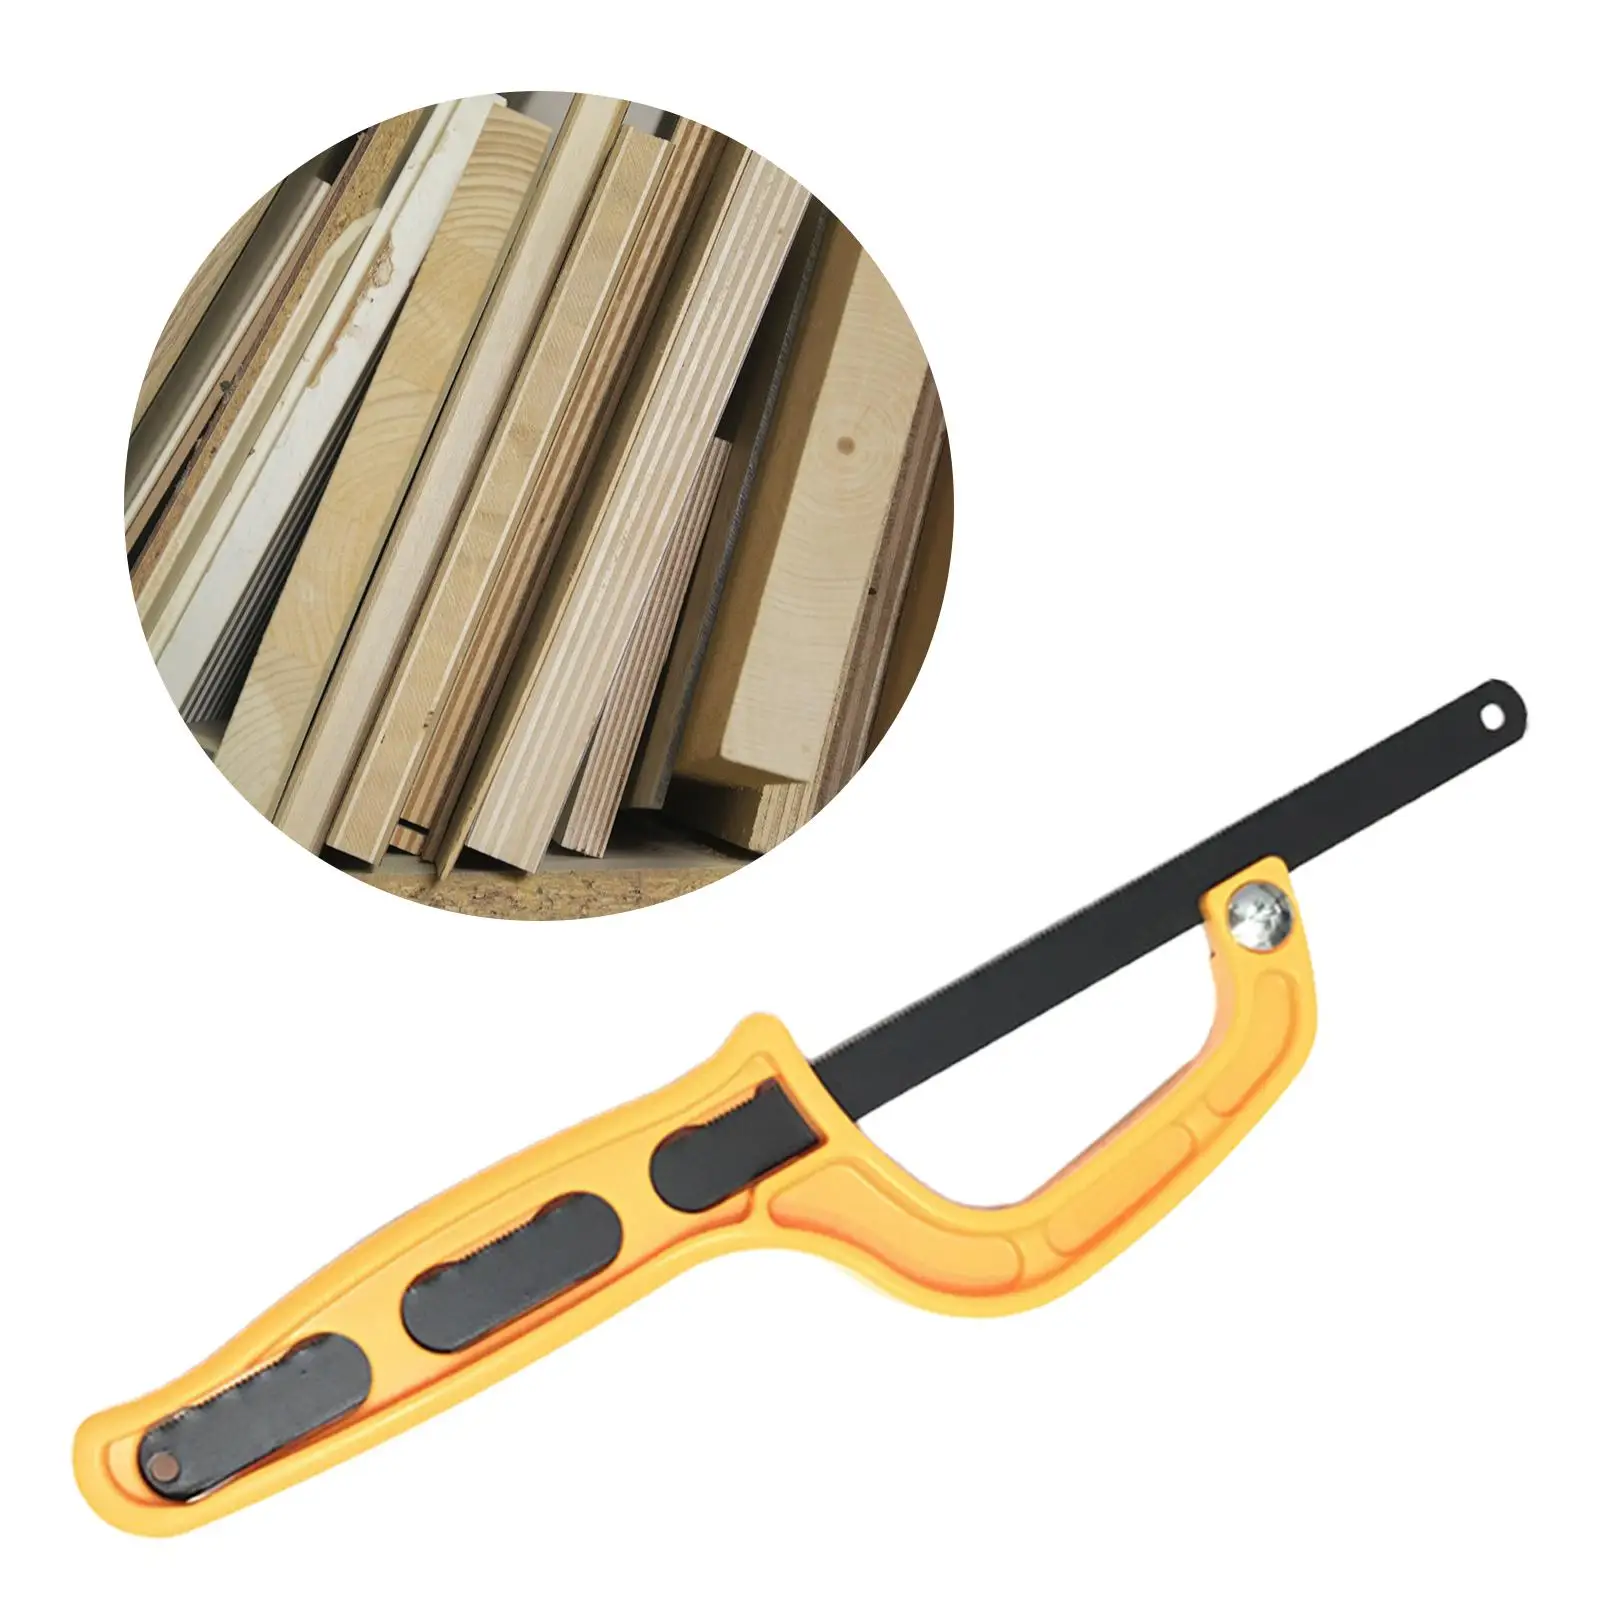 Portable Mini Hack Saw Hand Saw for Wood and Metal Hand Tool Wood Trimmer DIY Working Garden Adjustable Professional Pruning Saw